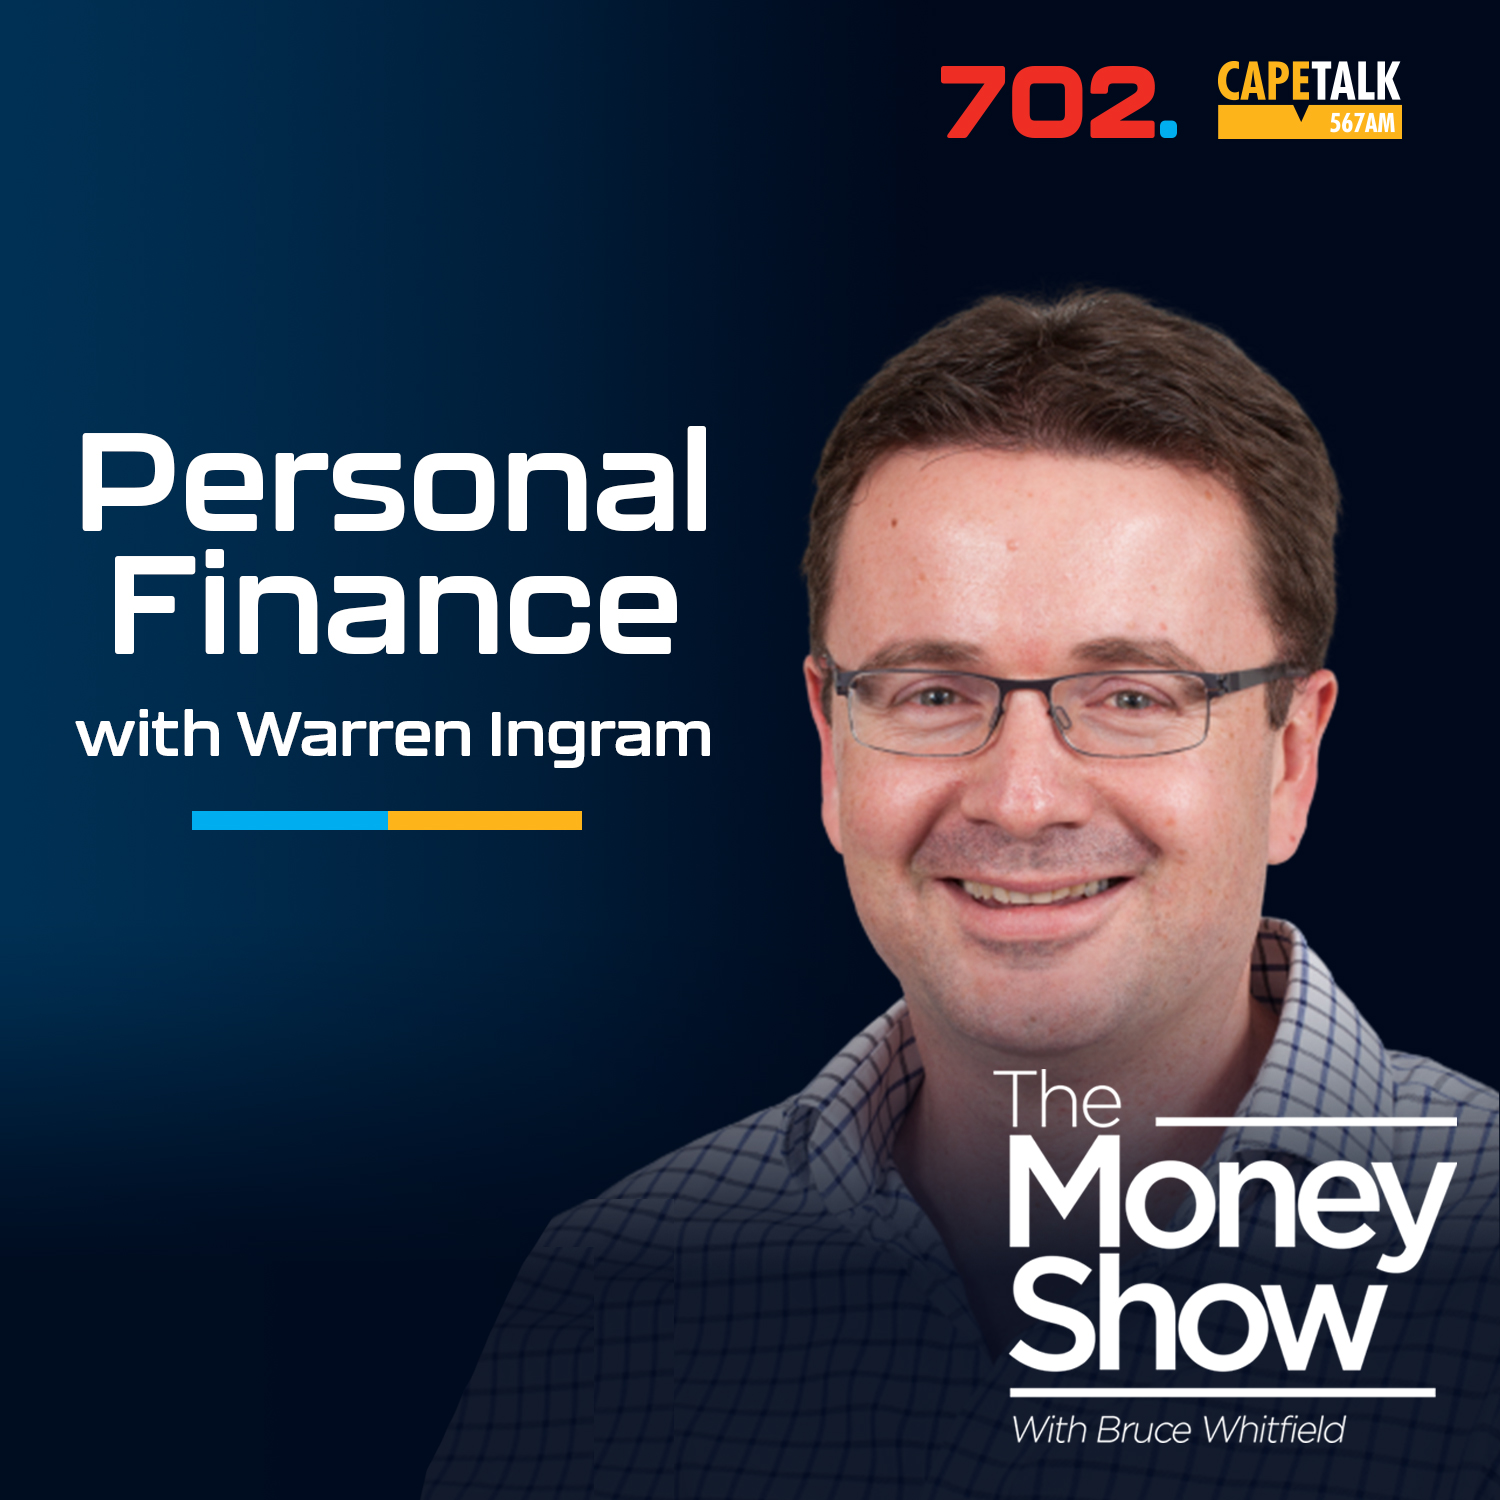 Personal Finance - What should you teach your children about money?